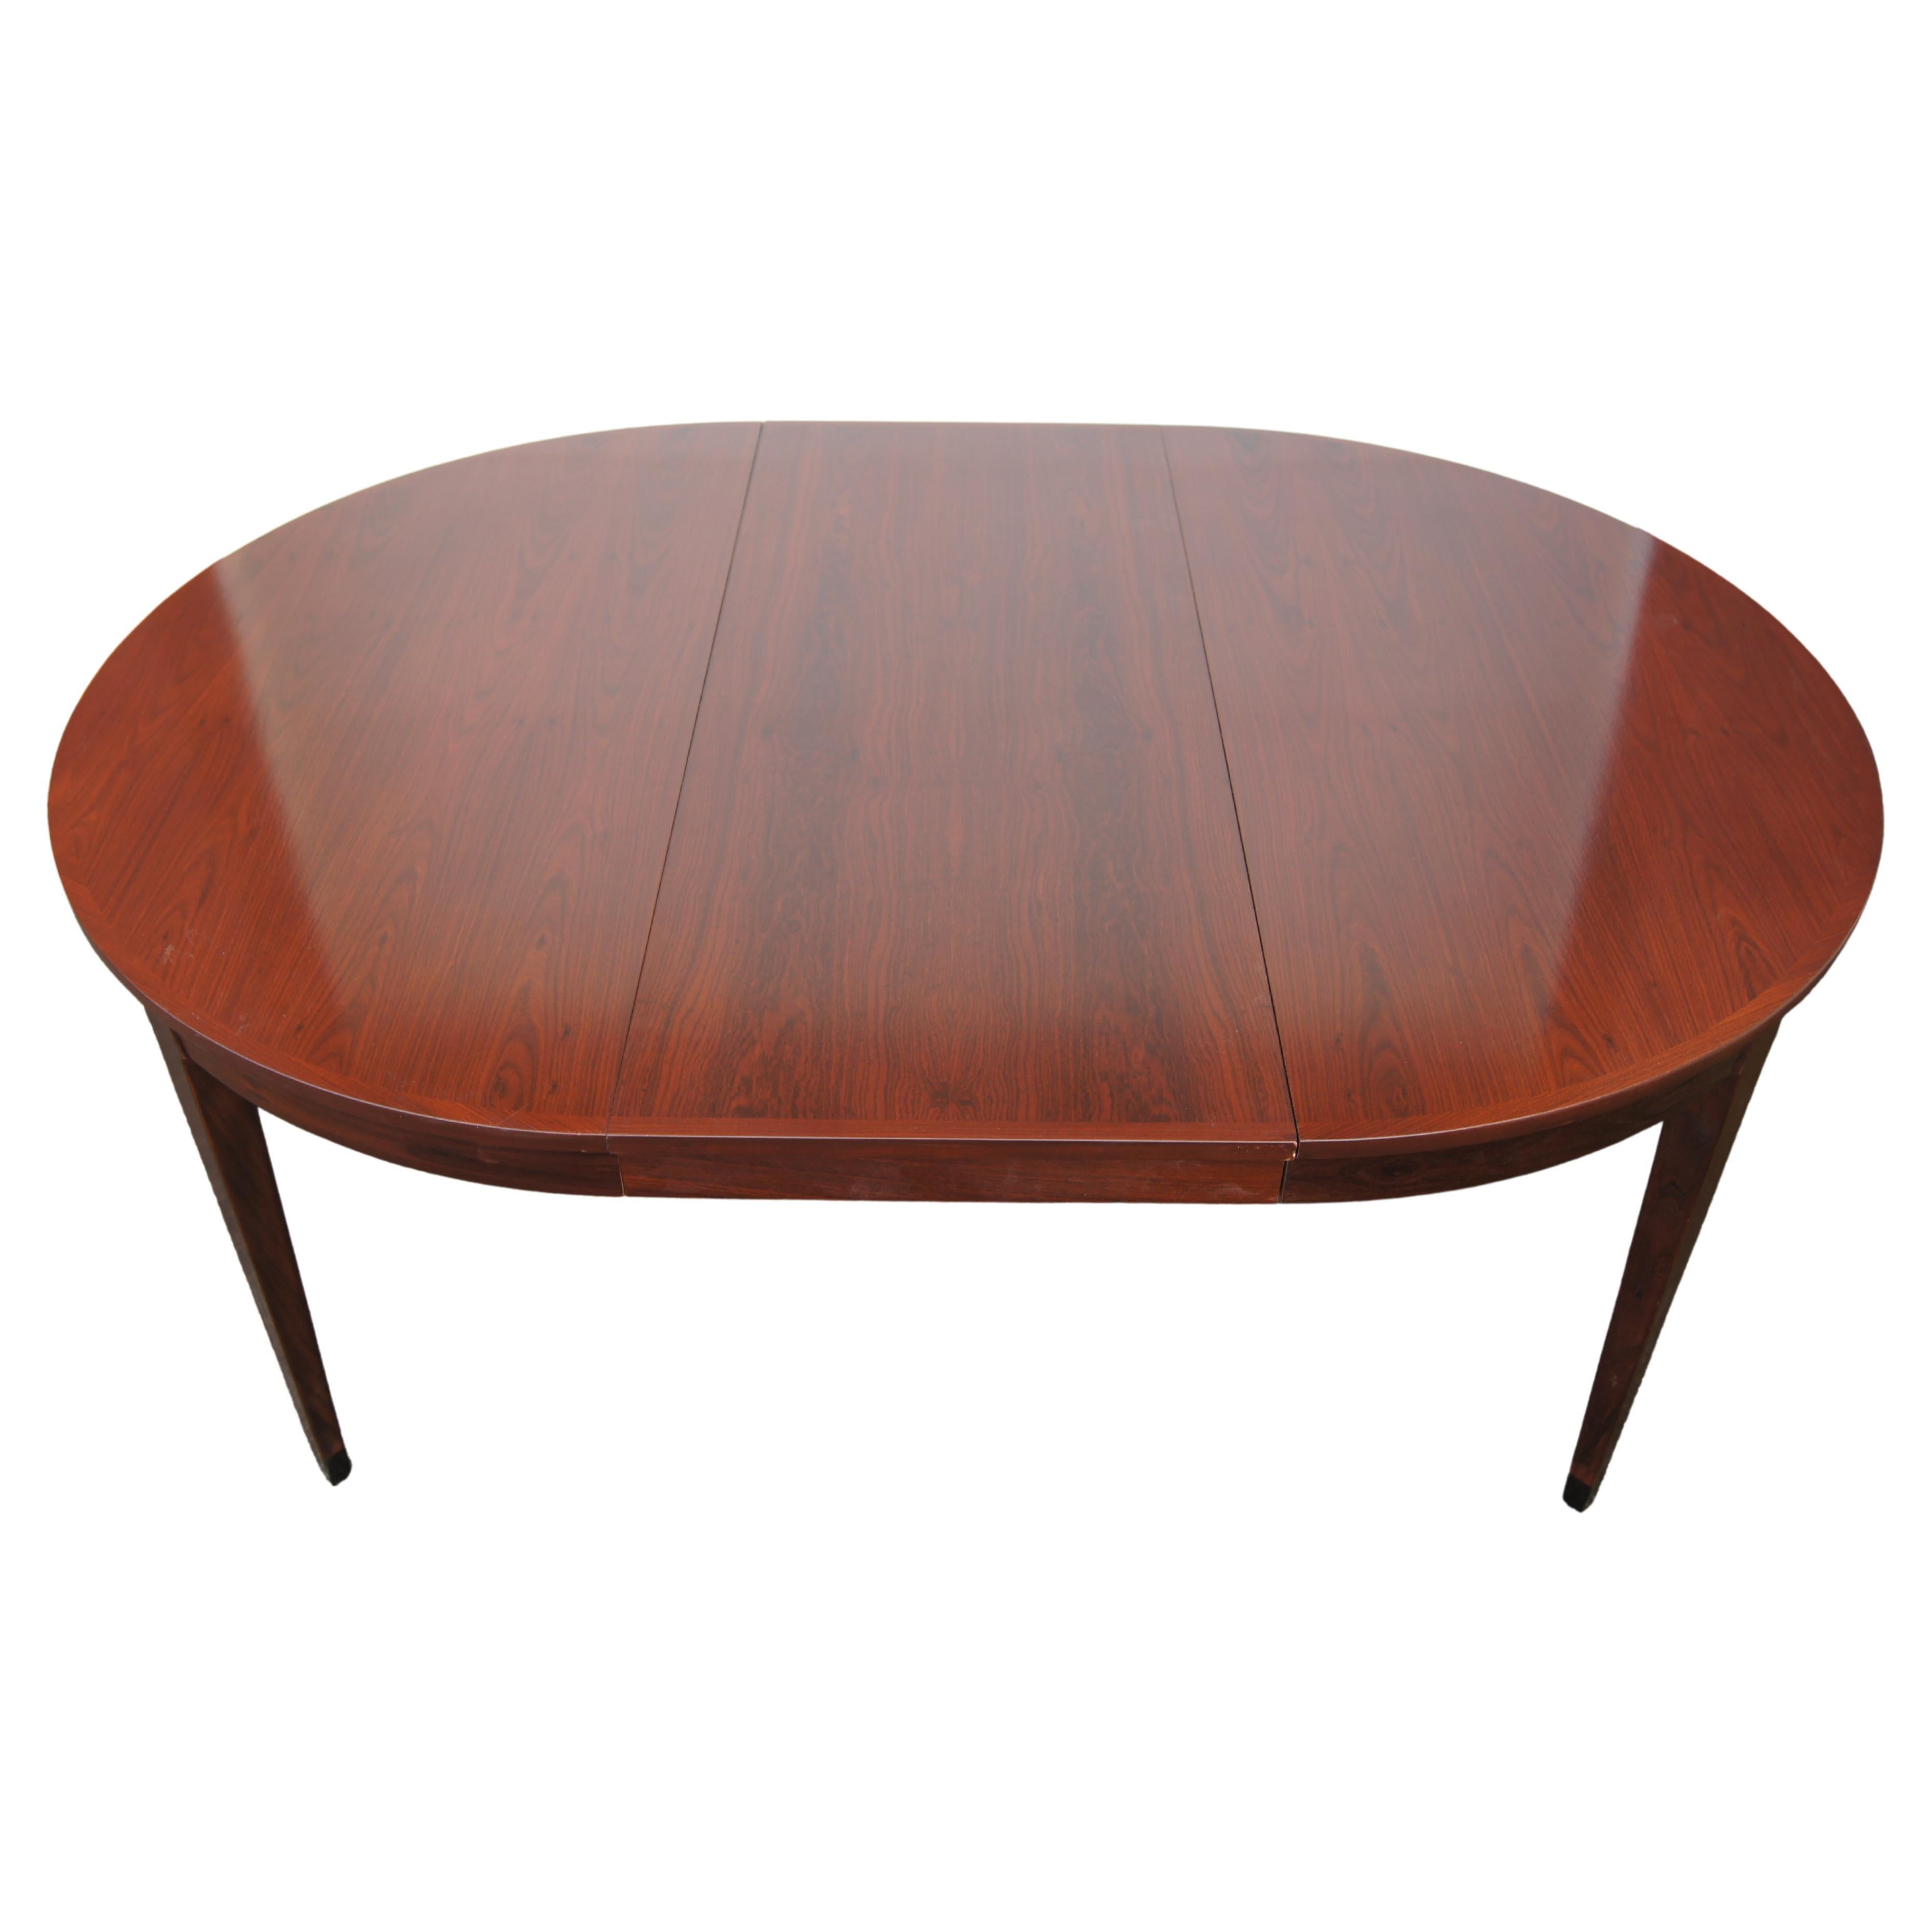 Round Rosewood Dining Table with Extension by Arne Vodder For Sale